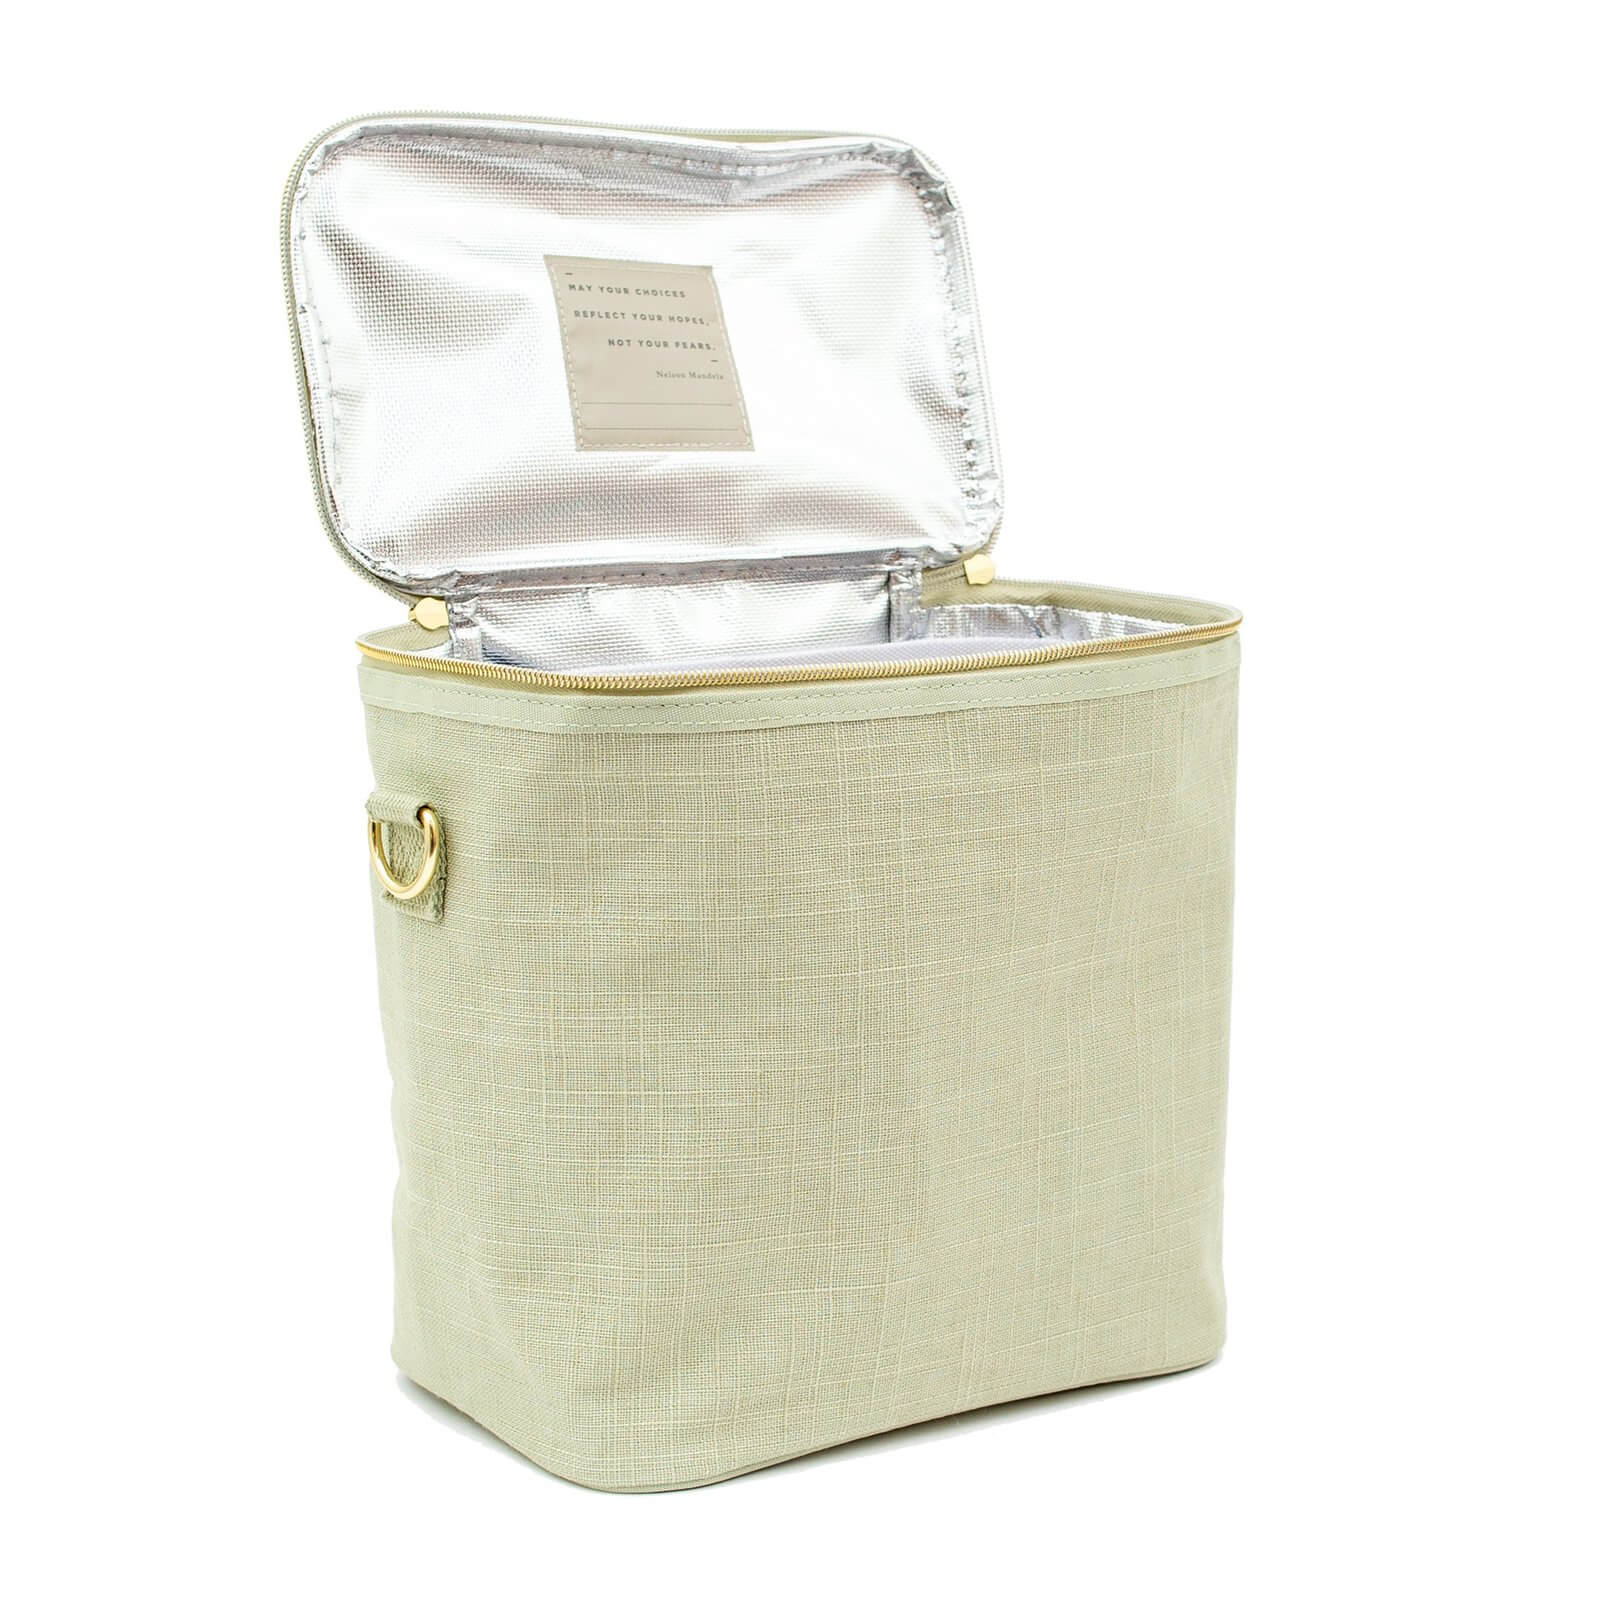 Linen Lunch Poche Bag - Sage Green - by SoYoung on the go SoYoung Prettycleanshop